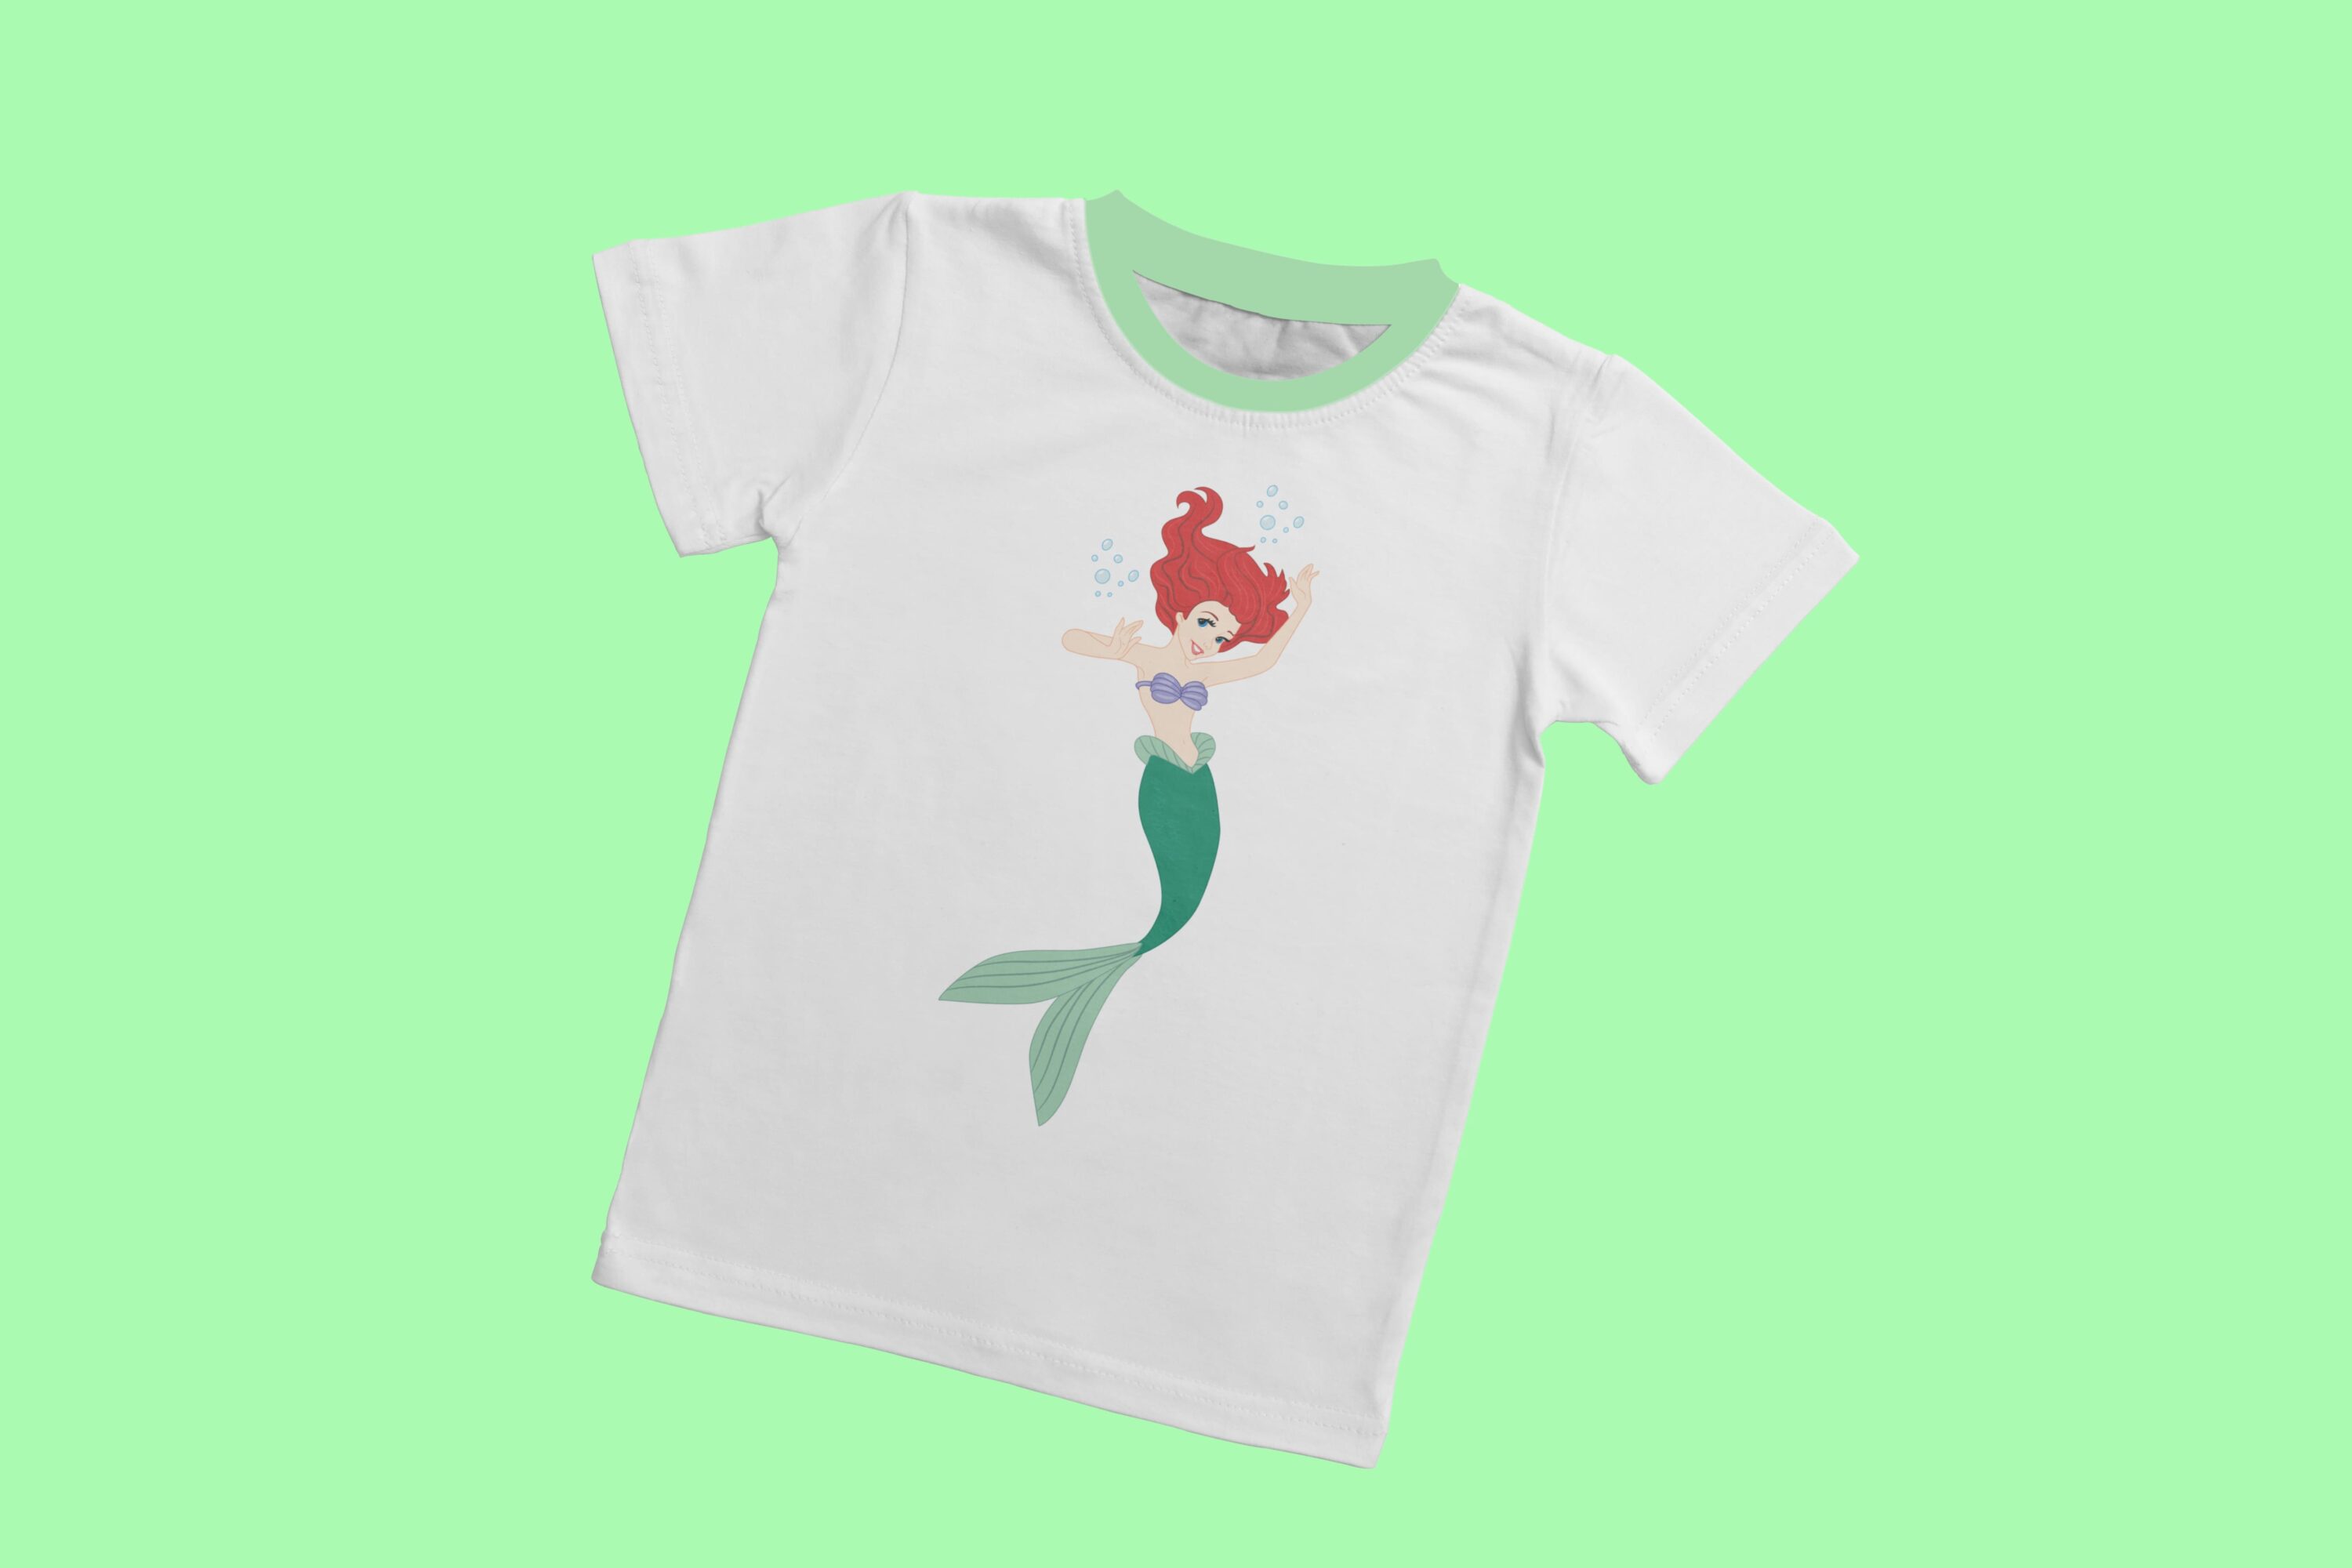 A floating mermaid with red hair and a green tail.